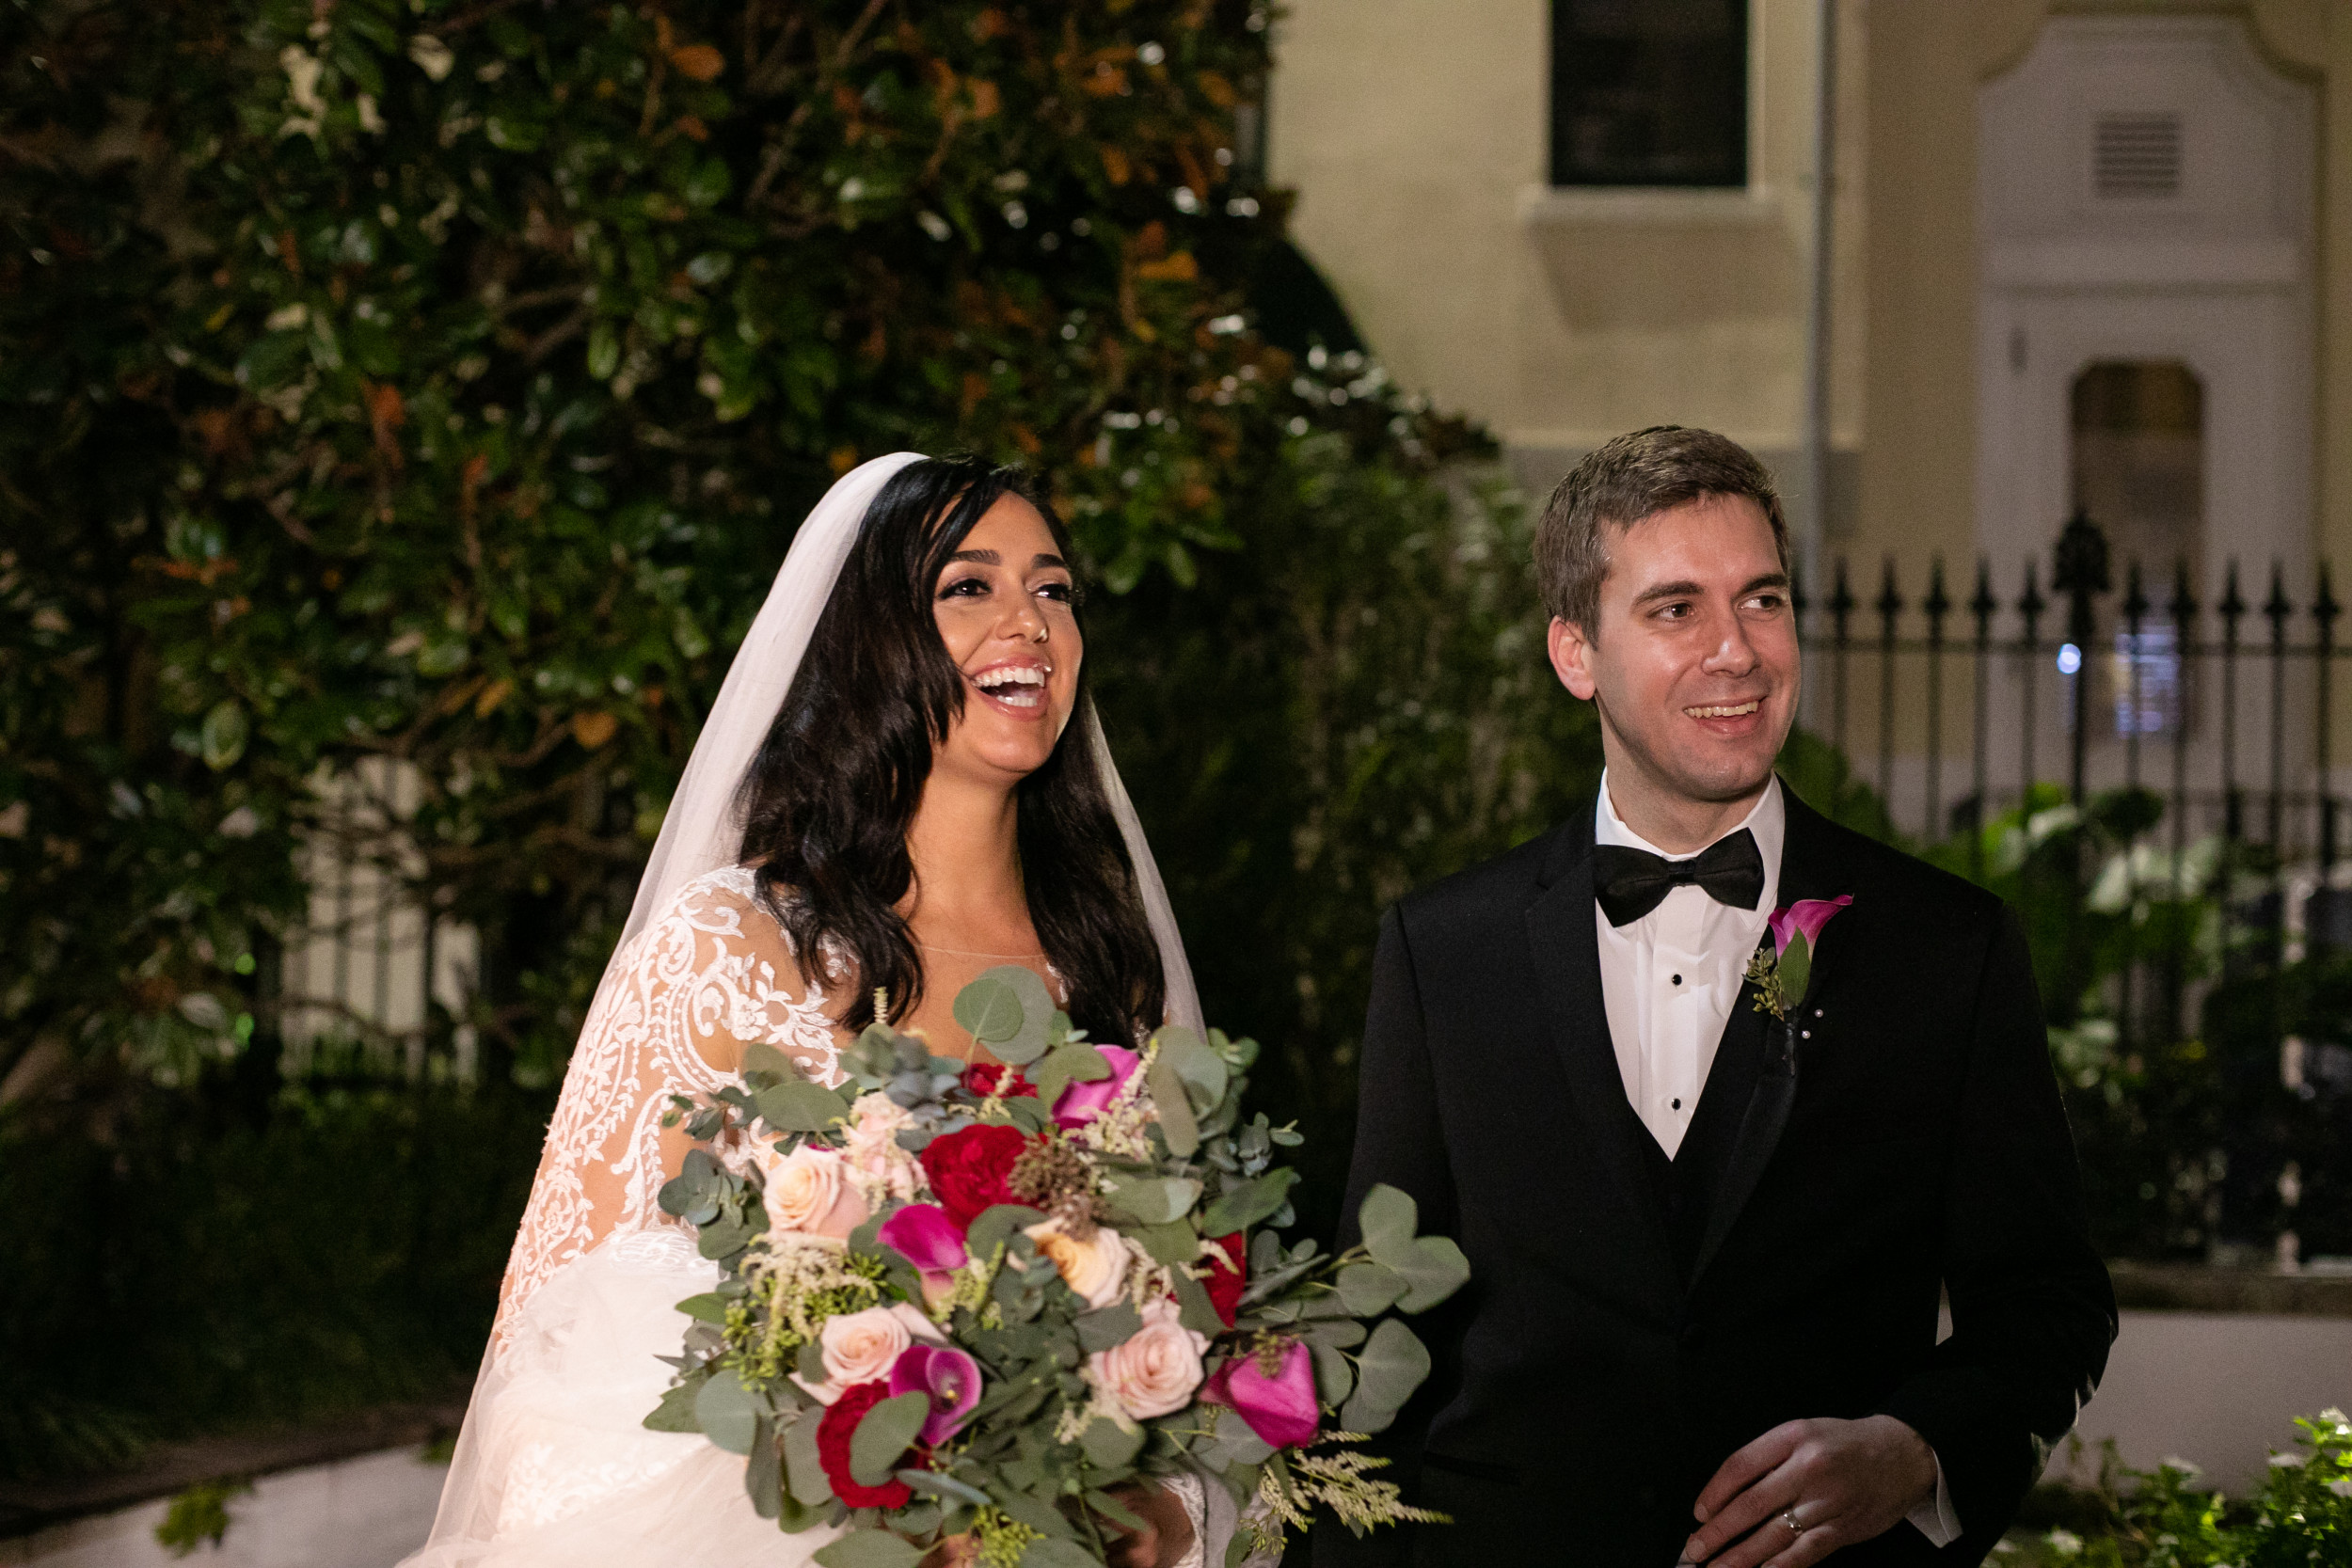 Married at First Sight' set to return with Season 11 in New Orleans.